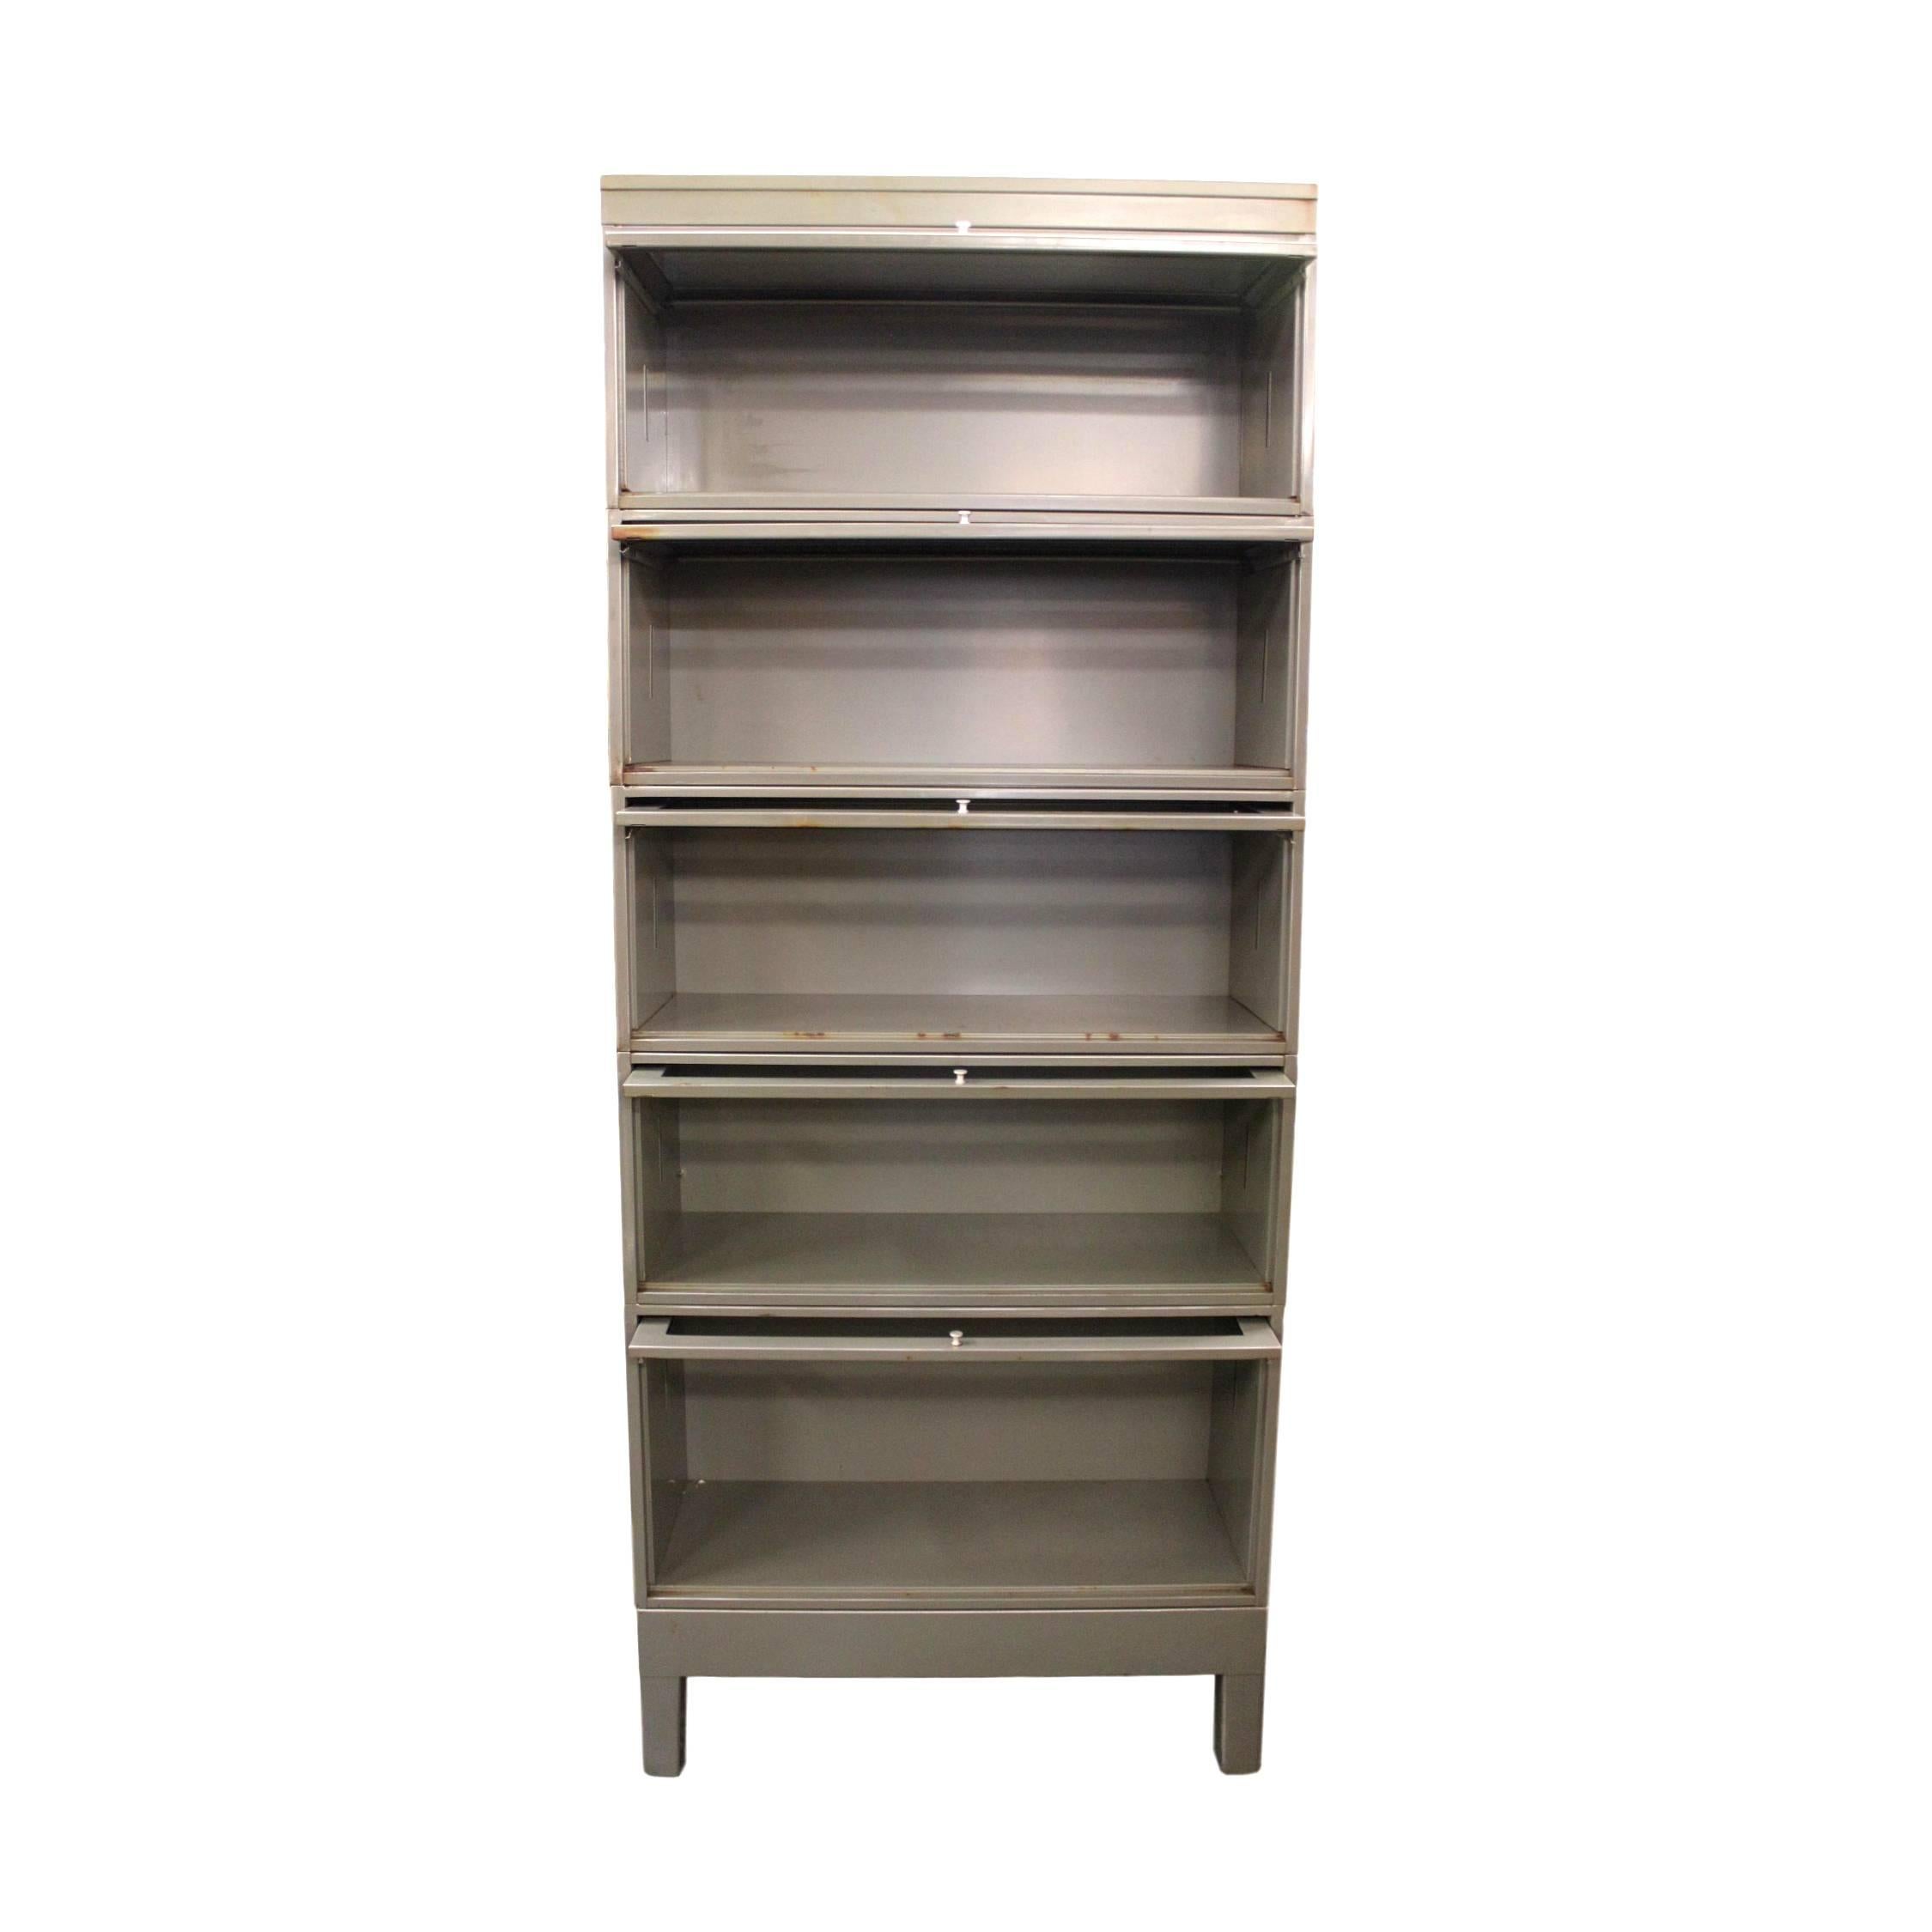 Fantastic vintage metal barrister bookcase.  Bookcase stands over 6 1/2 feet tall and features a great industrial patina to its original gray paint, steel construction,  aluminum hardware, and clear, crack-free glass.  Would add some impressive